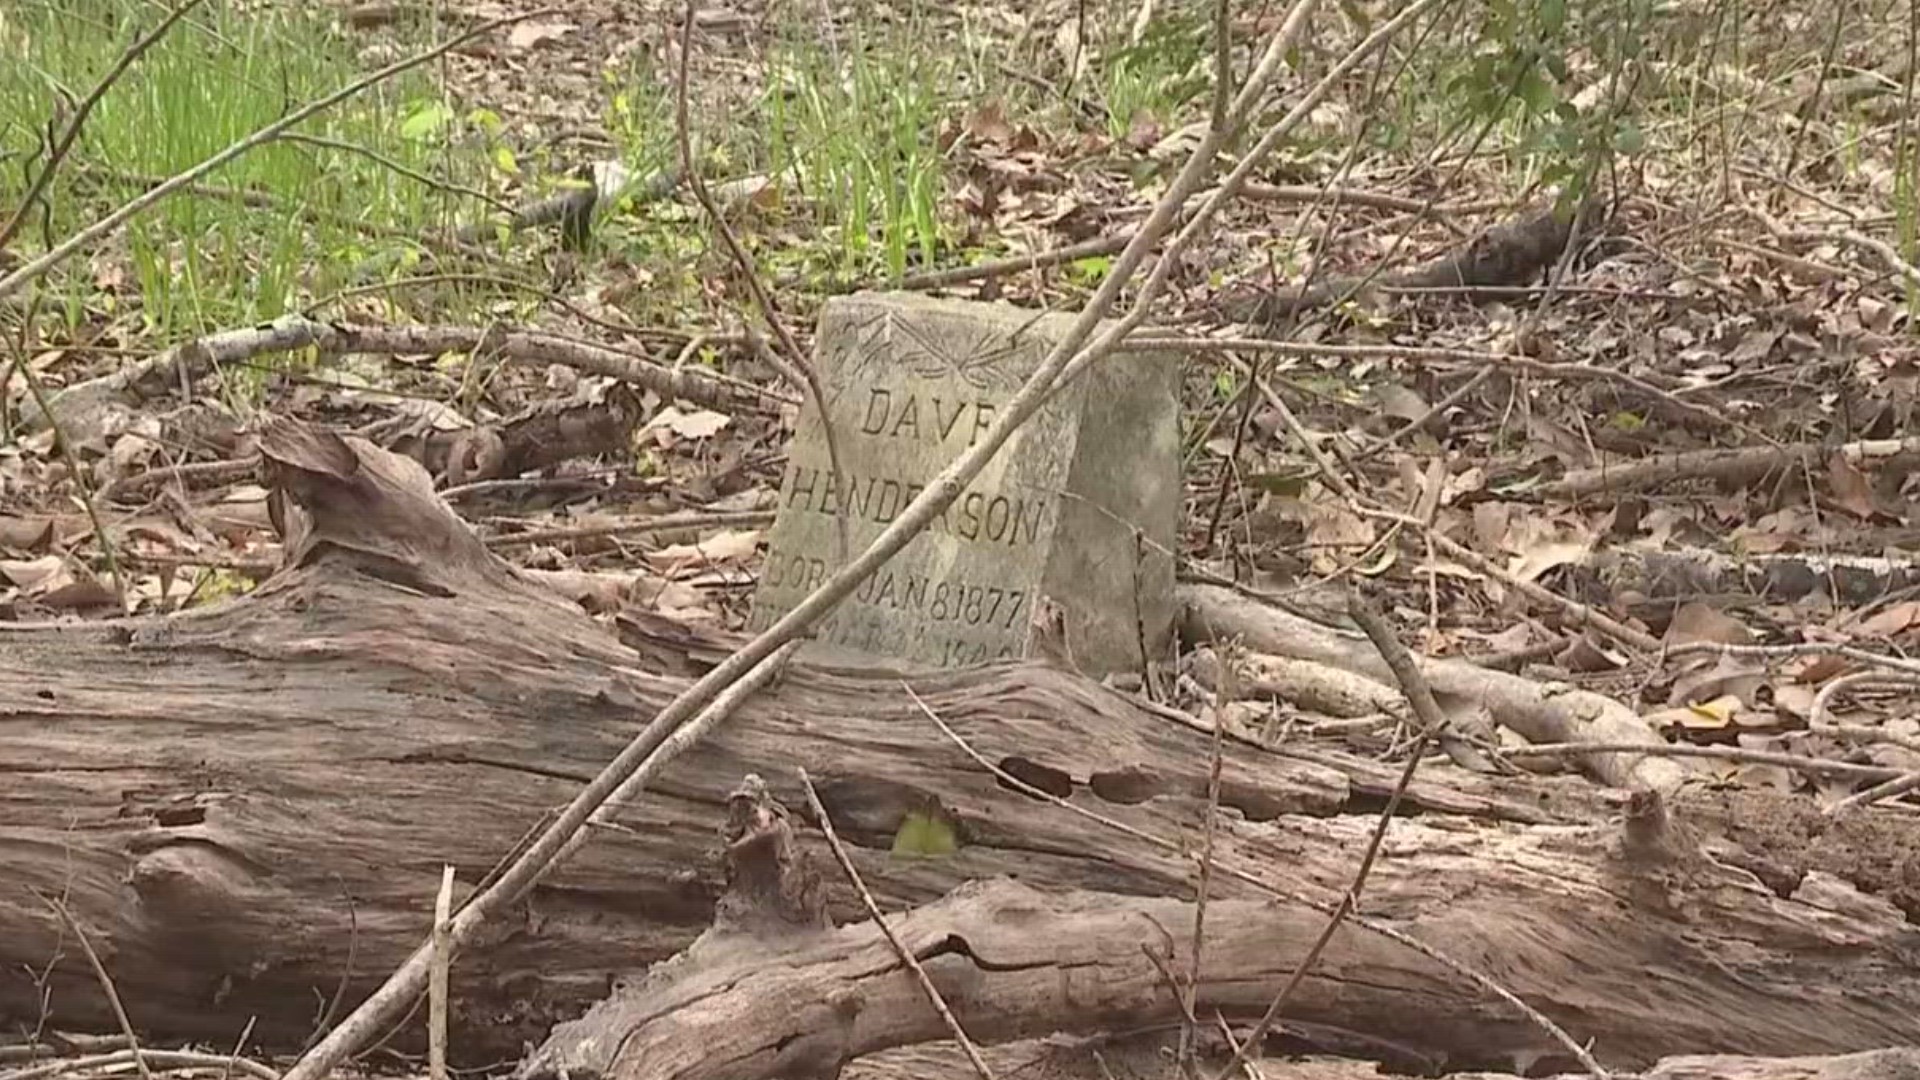 A family on Houston's east side is fighting to save the Pleasant-Green Culbertson Cemetery - a historic Black burial ground that dates back to the 1800s.